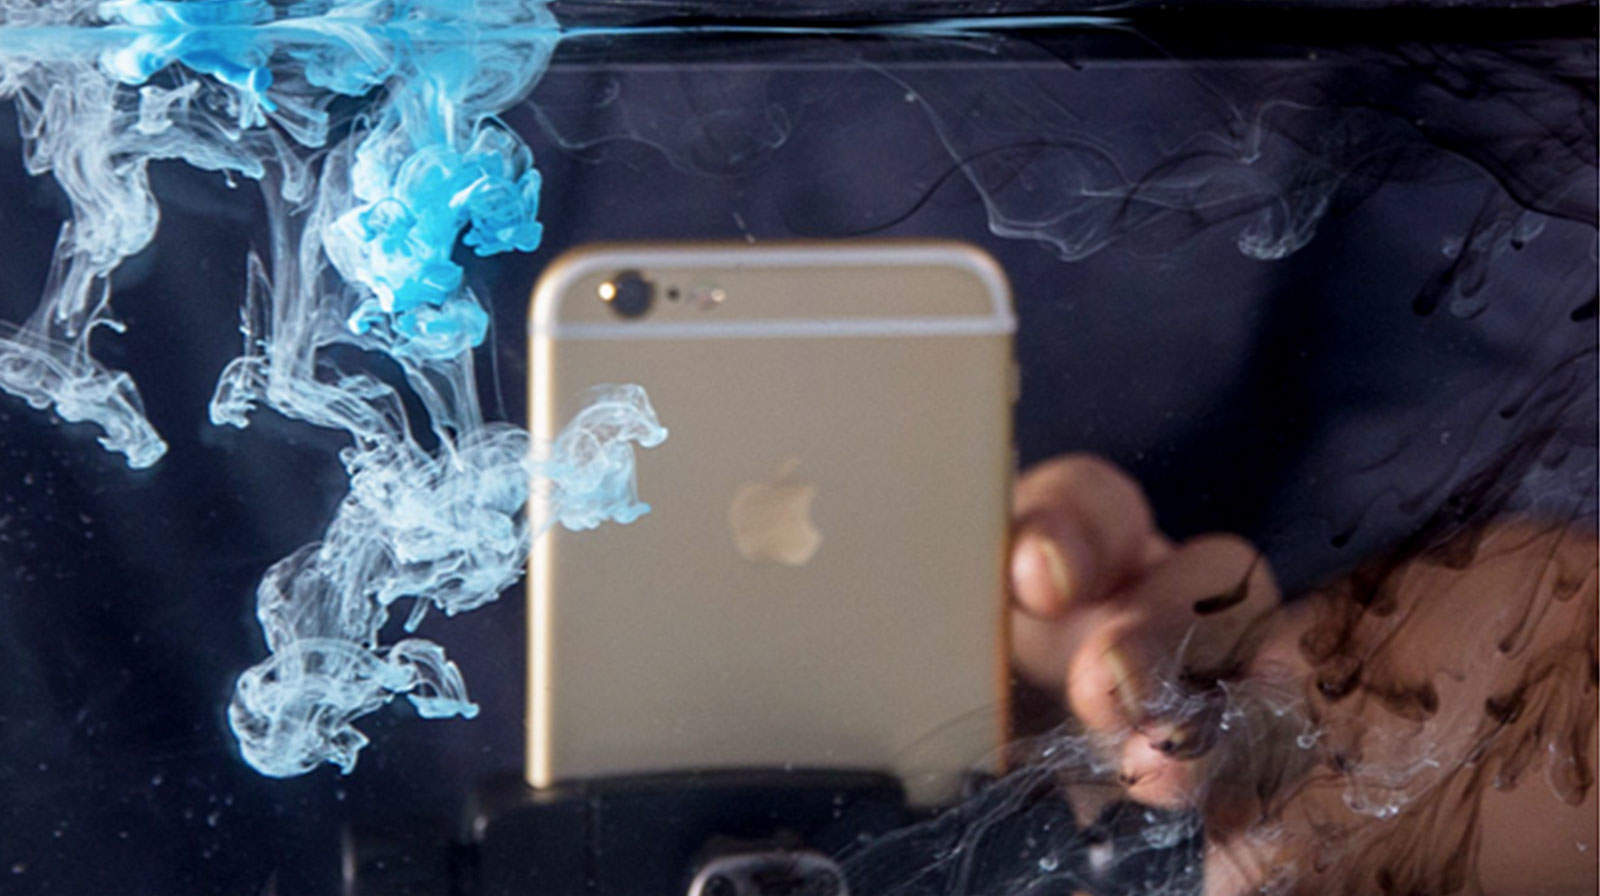 Artist Lu Jun of China photographs ink interacting with water. He then converts his iPhone photos on an iMac into fluid landscapes.